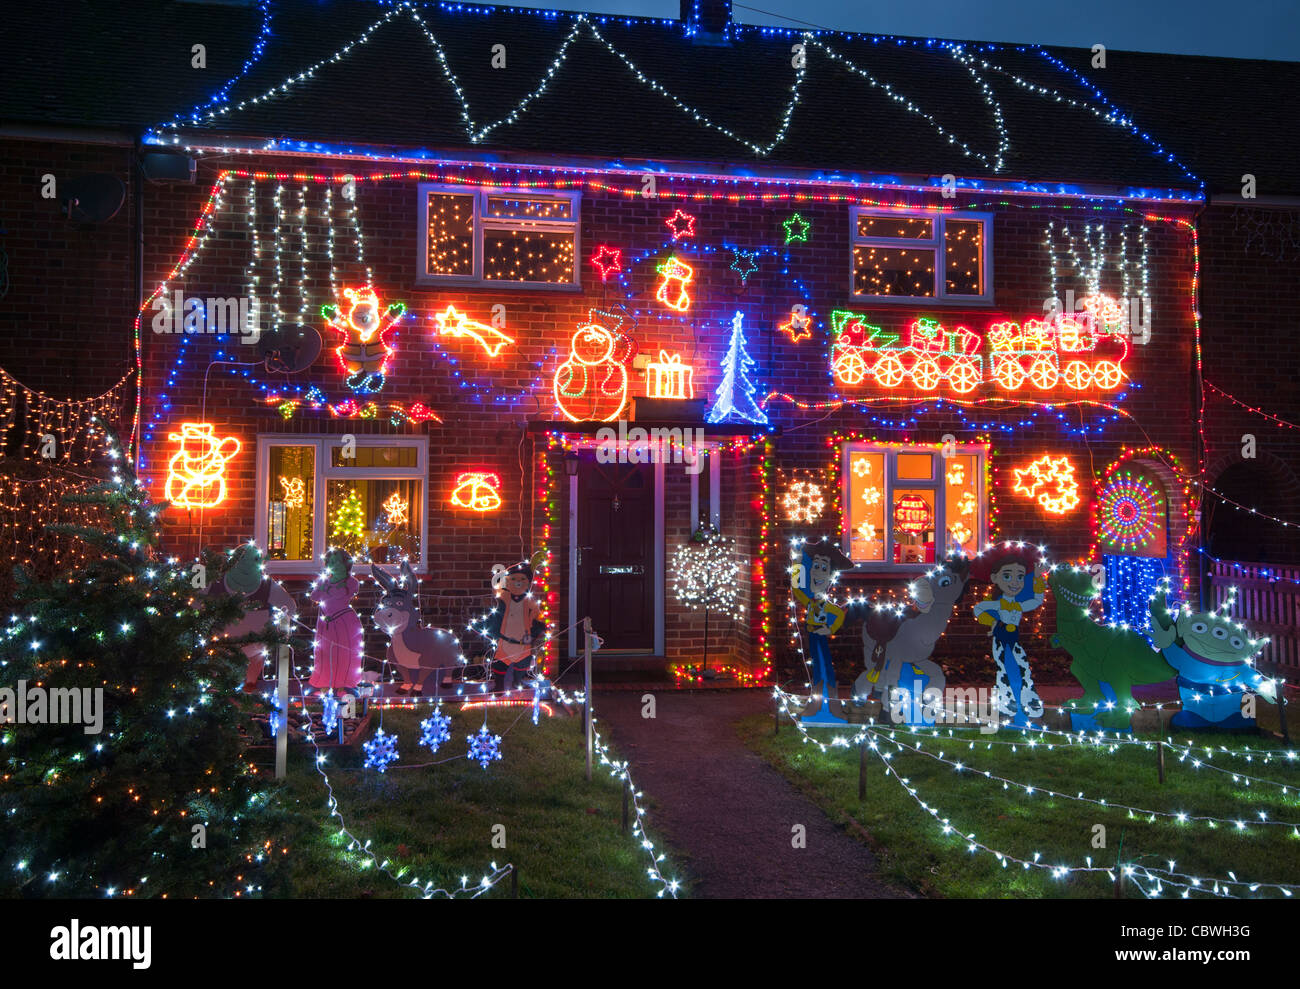 Exterior Of A House Lit Up With Christmas Lights At Dusk Home Property Illuminated Xmas Decorations At Night Stock Photo